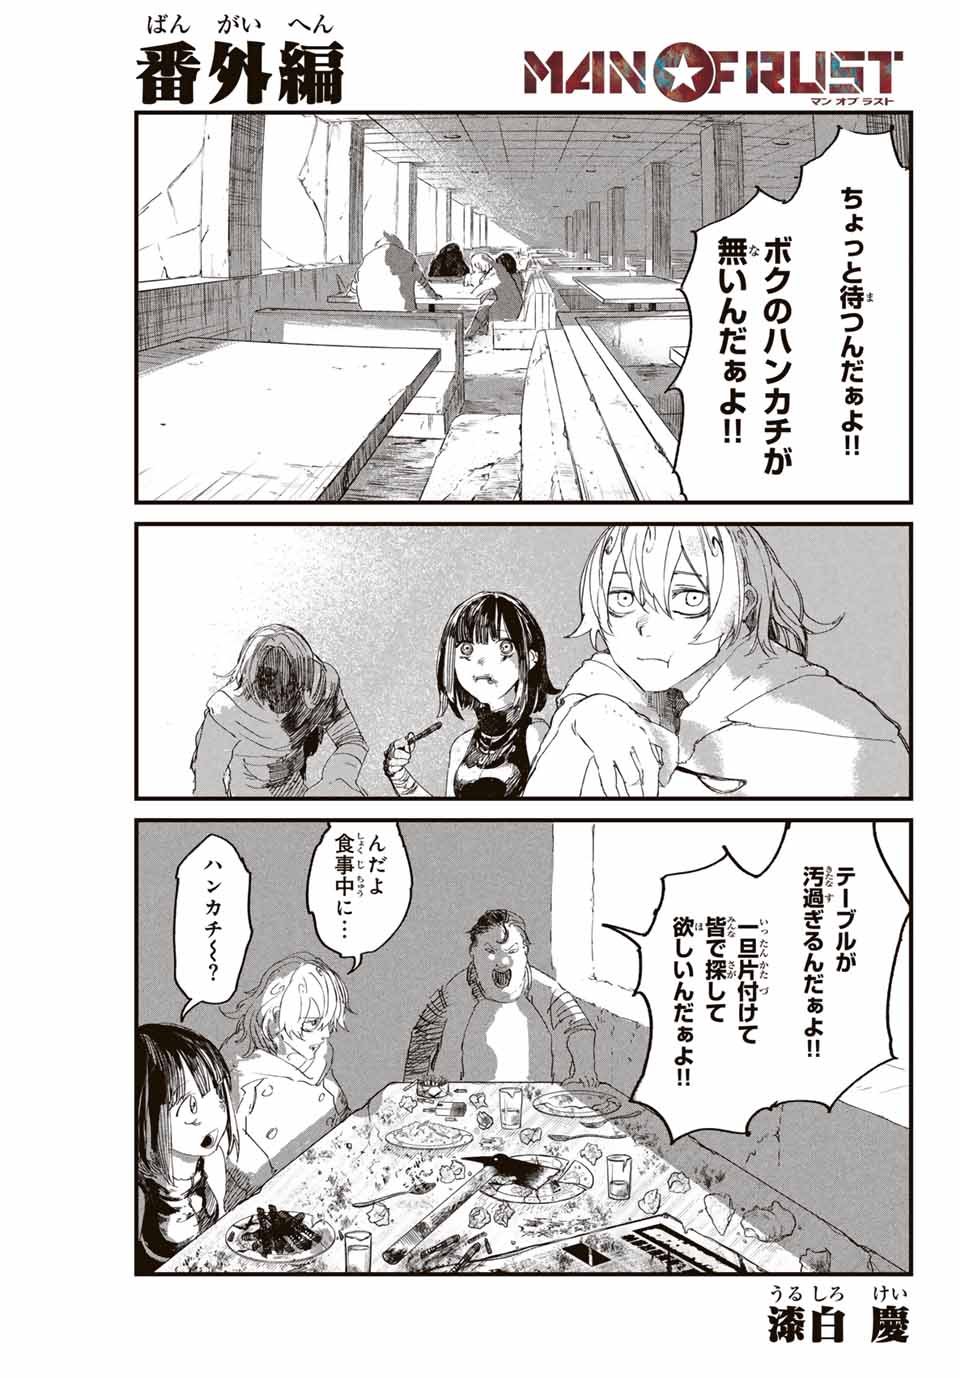 MAN OF RUST 第12.5話 - Page 1